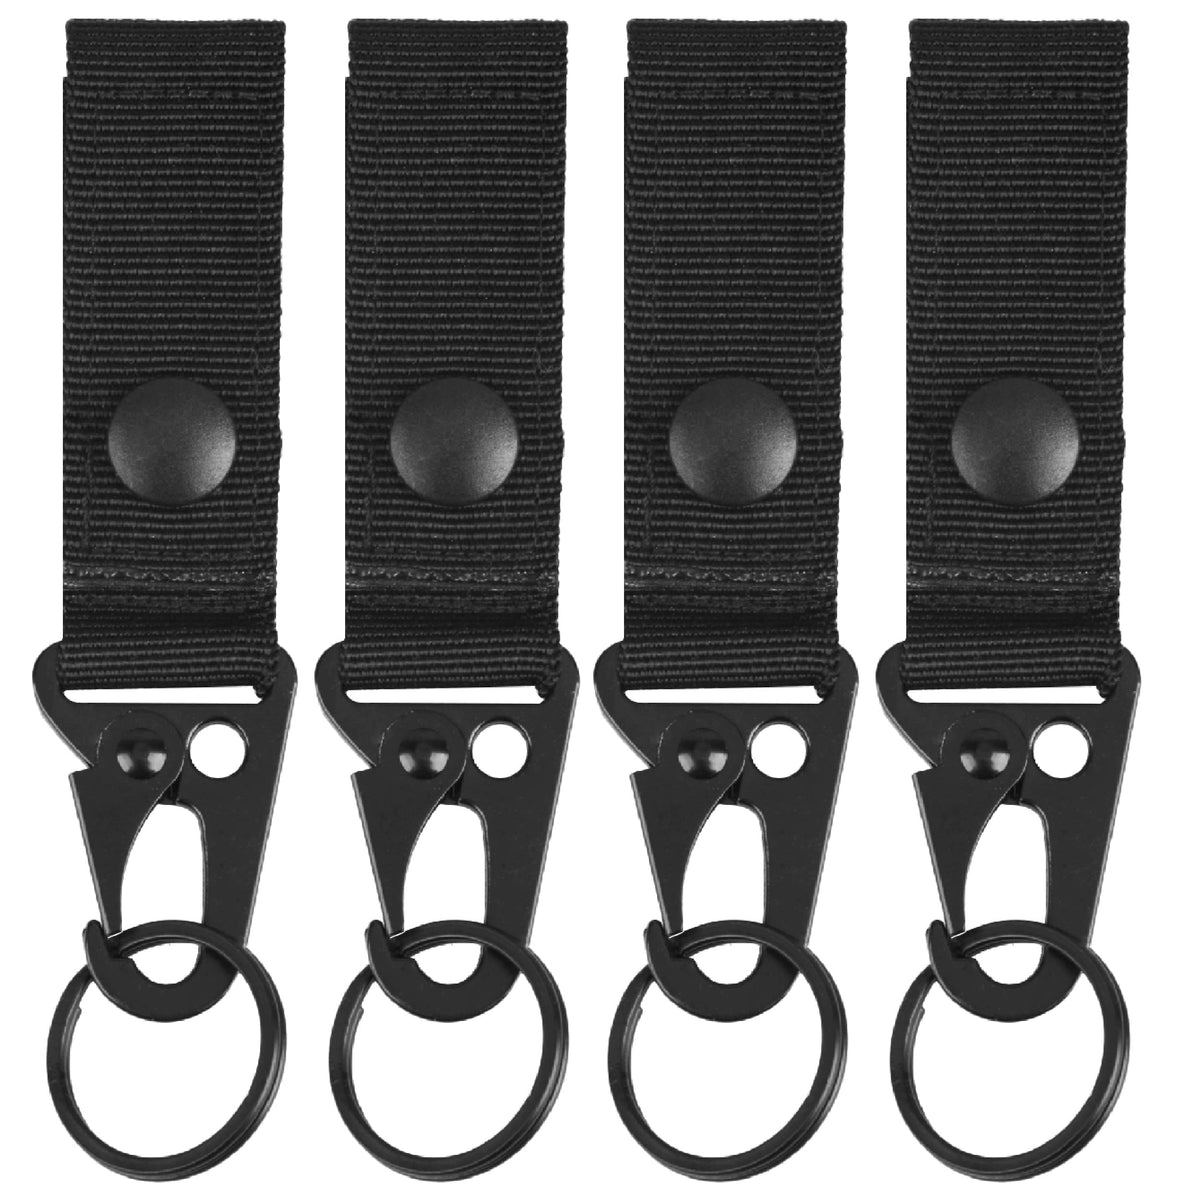 Azarxis Tactical Hanging Belt Webbing Carabiner Buckle Molle Strap Nylon Snap Hook Clip, Keychain Keyholder Ring Tactical Backpack Molle Clip for Climbing Hiking Outdoor (Black - Pack of 4)